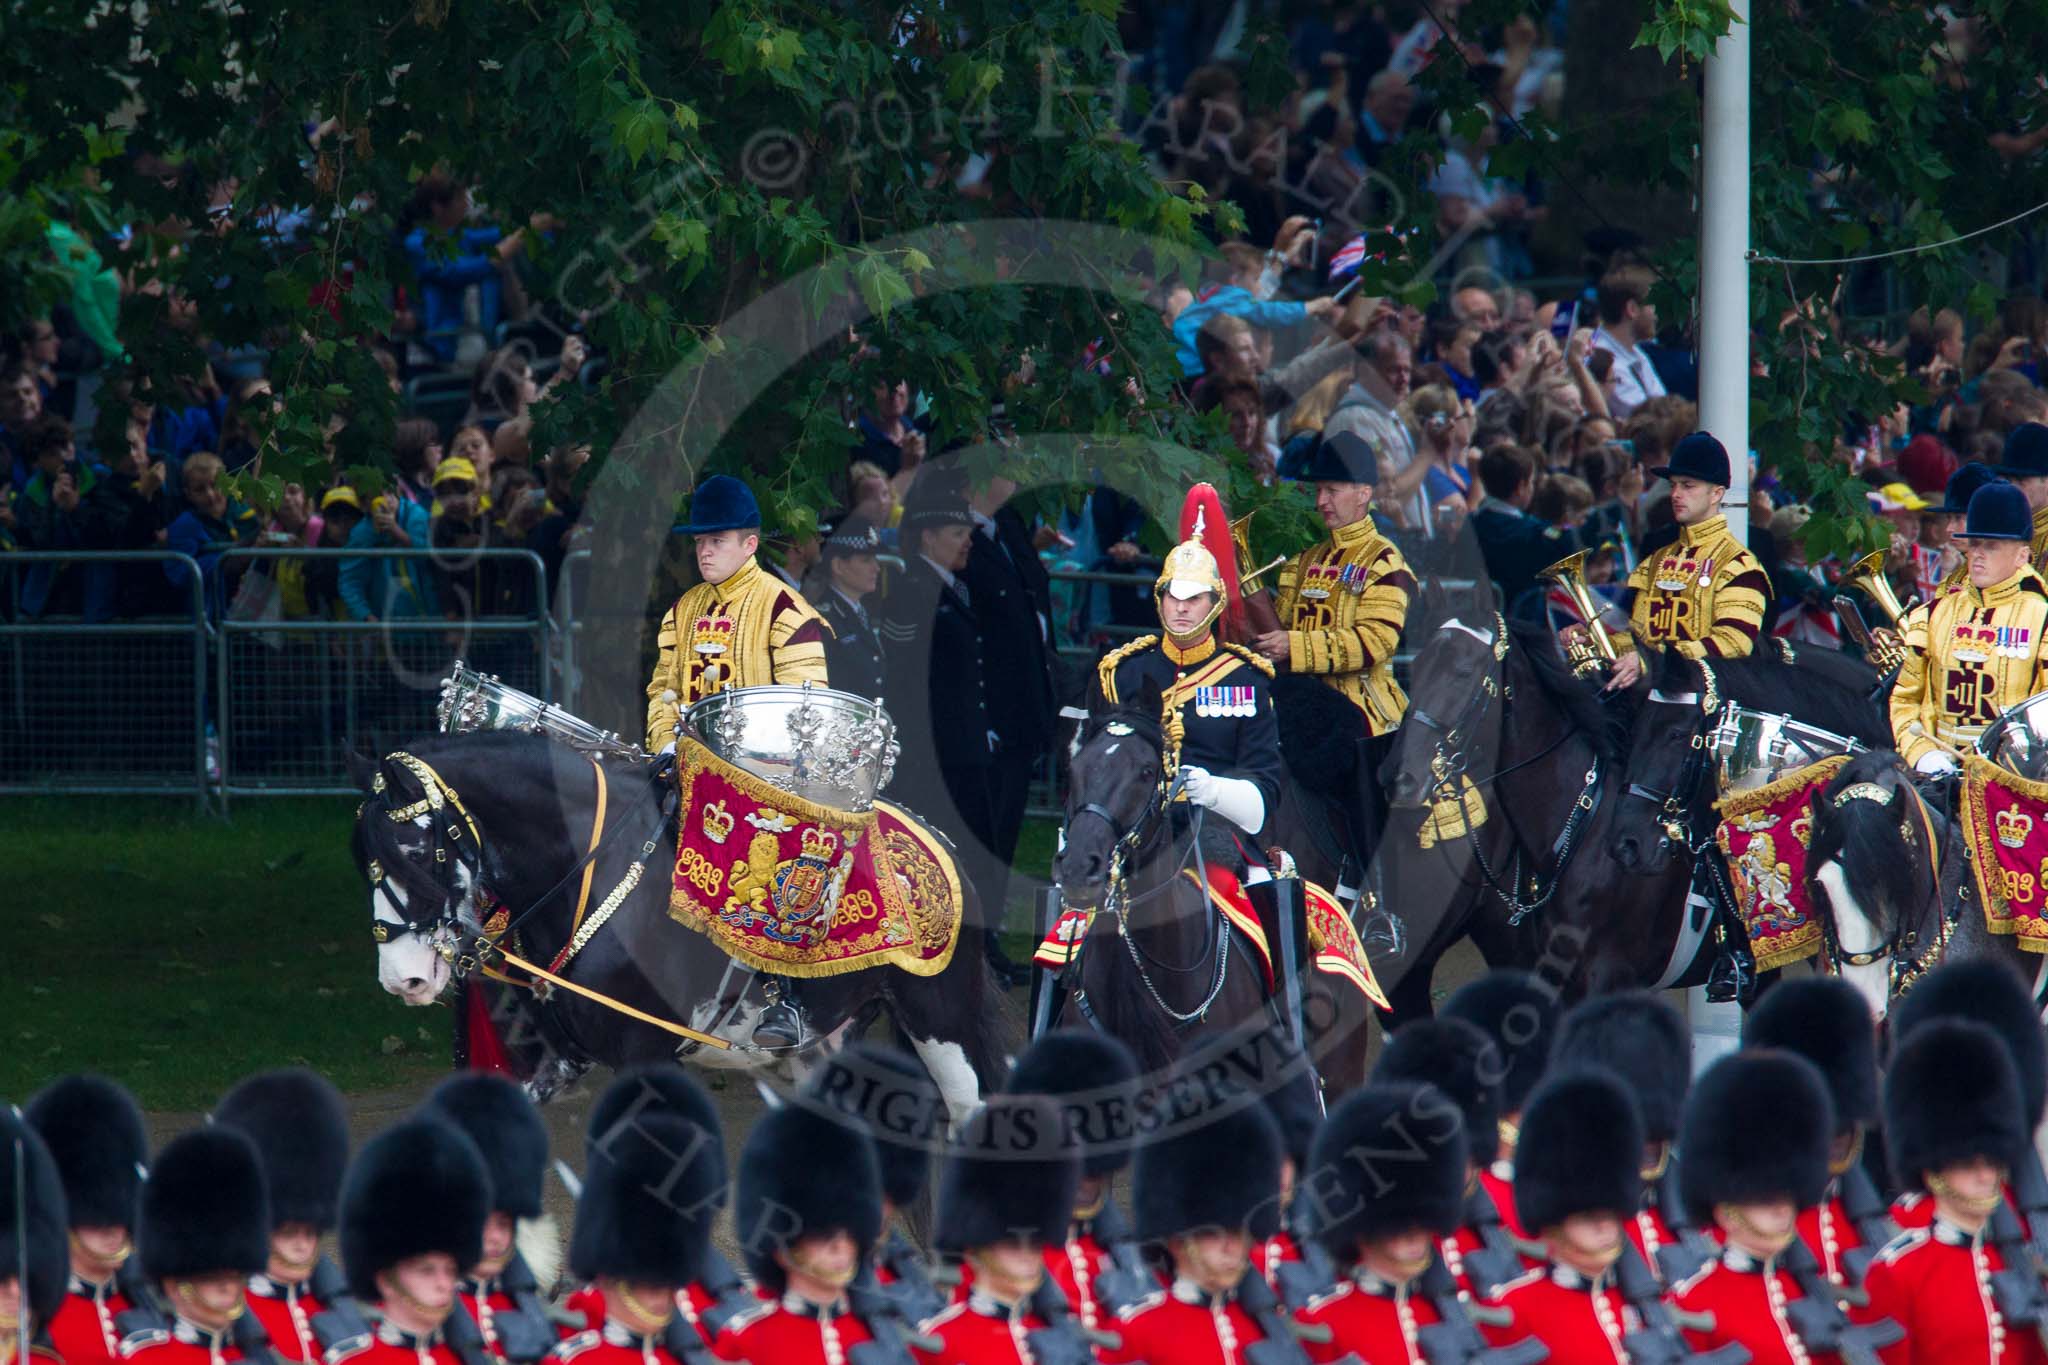 Trooping the Colour 2014.
Horse Guards Parade, Westminster,
London SW1A,

United Kingdom,
on 14 June 2014 at 10:56, image #314